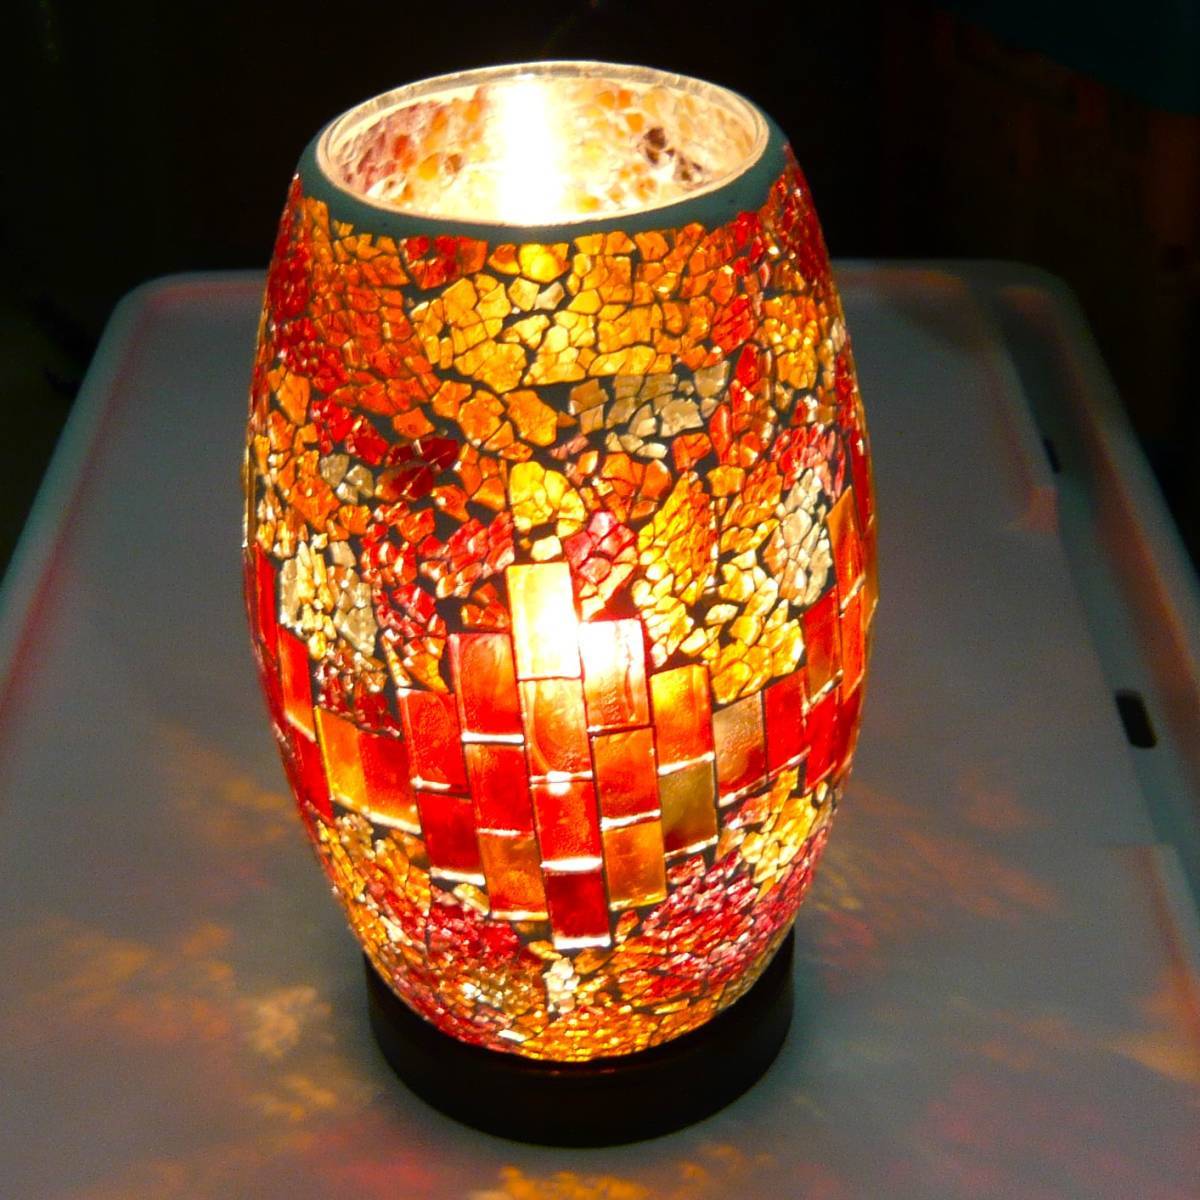 Mosaic lamp Klimt red stained glass indirect lighting lamp floor lamp light mosaic glass stained glass red, hand craft, handicraft, glass crafts, Stained glass